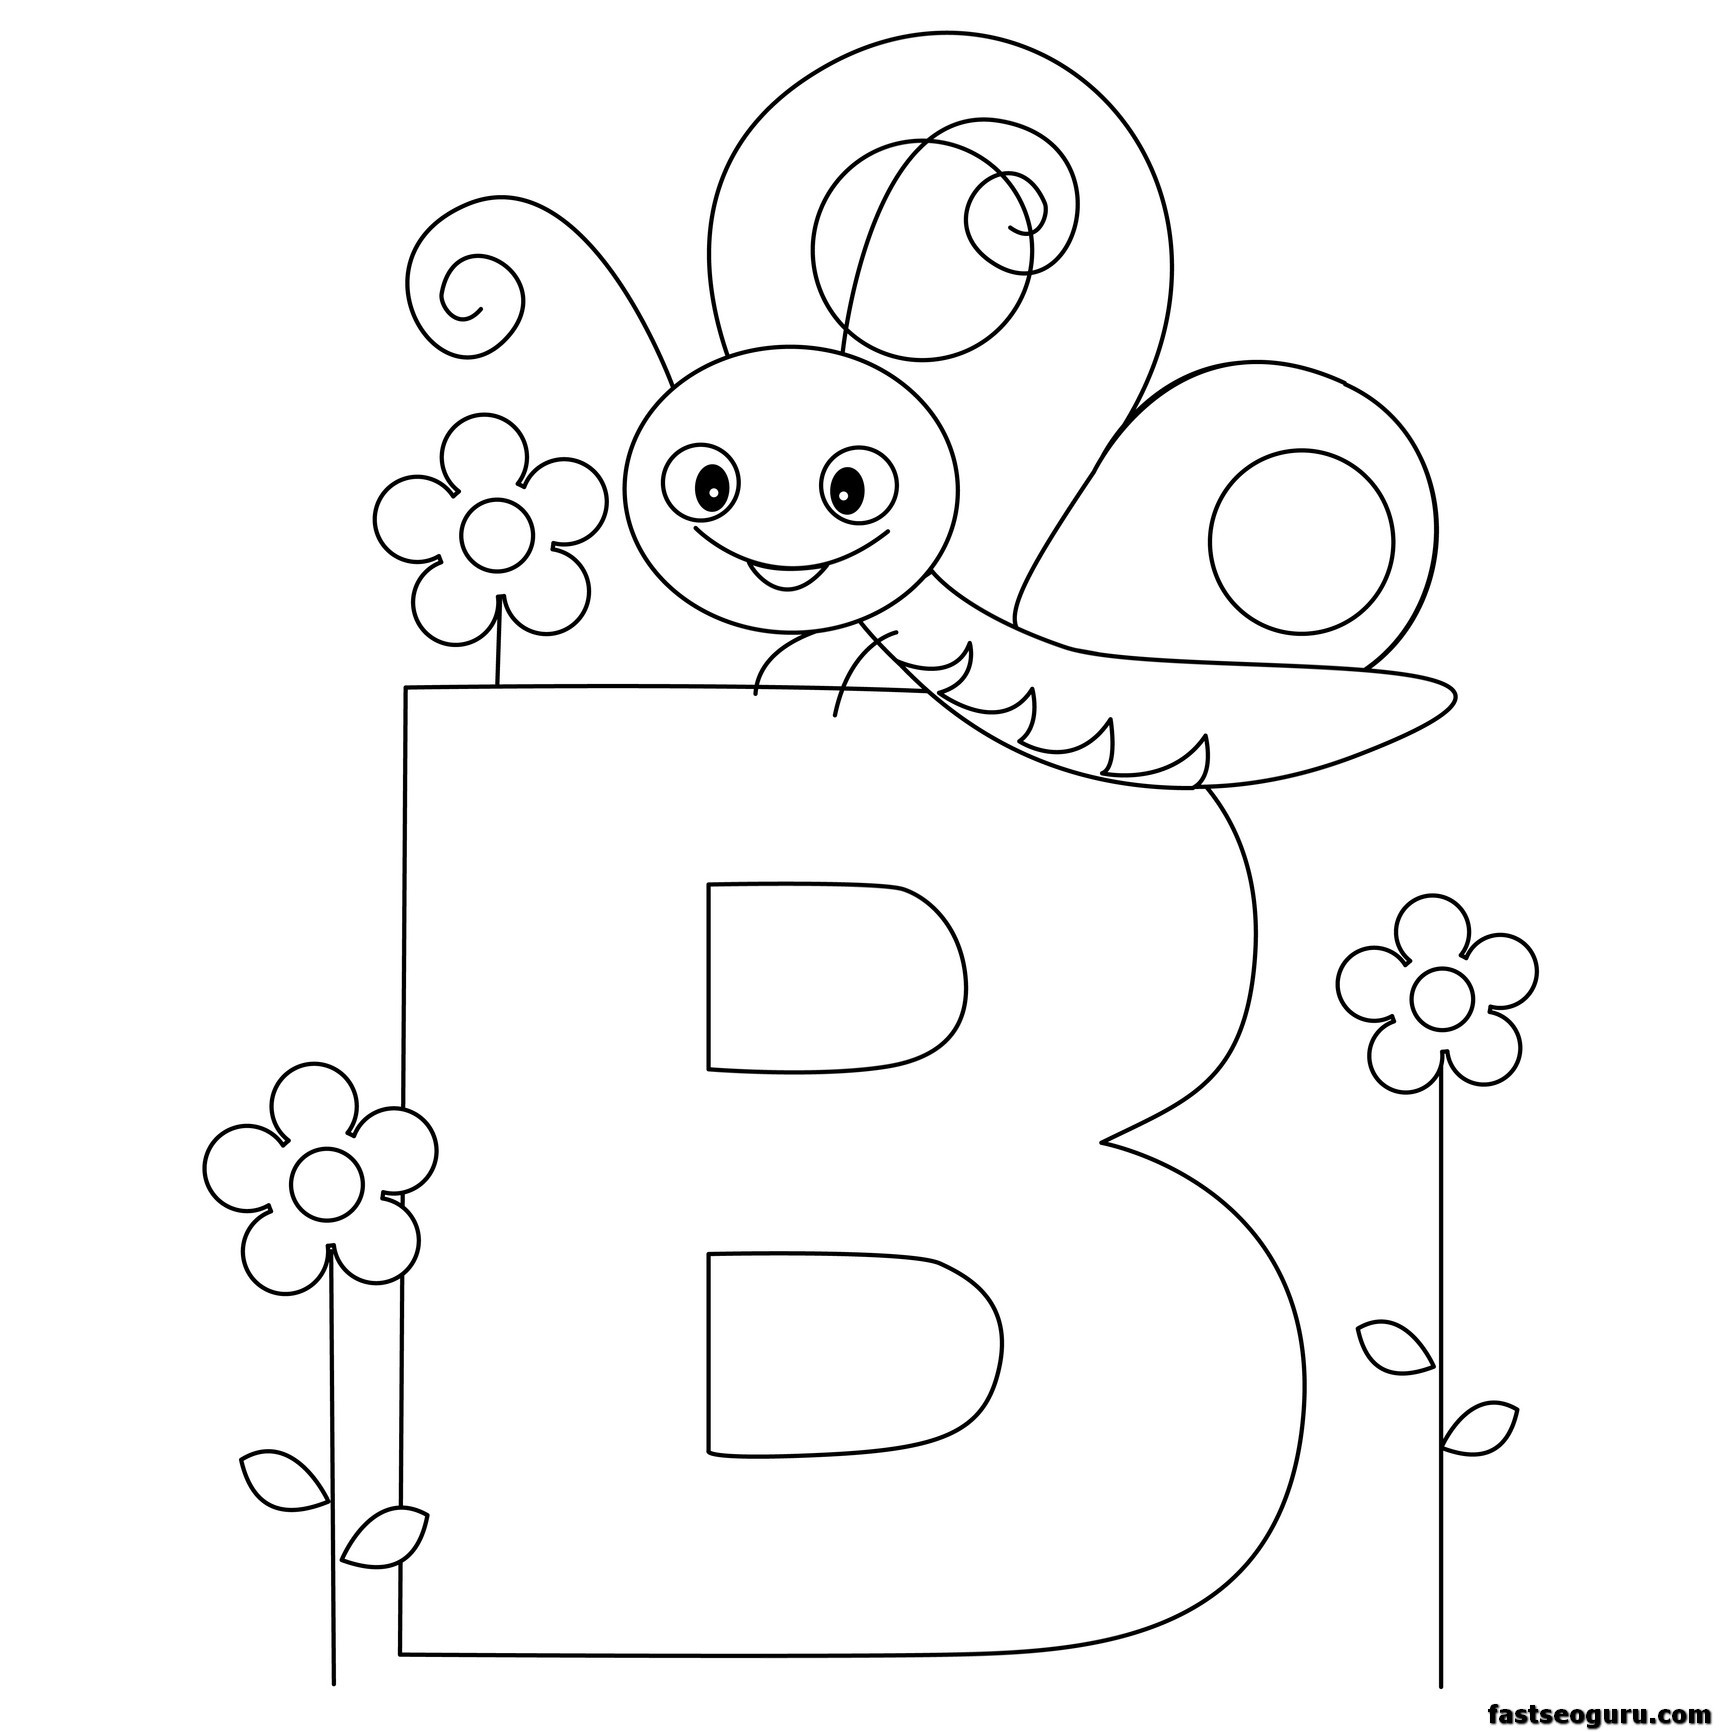 coloring pages alphabet preschool worksheets - photo #41